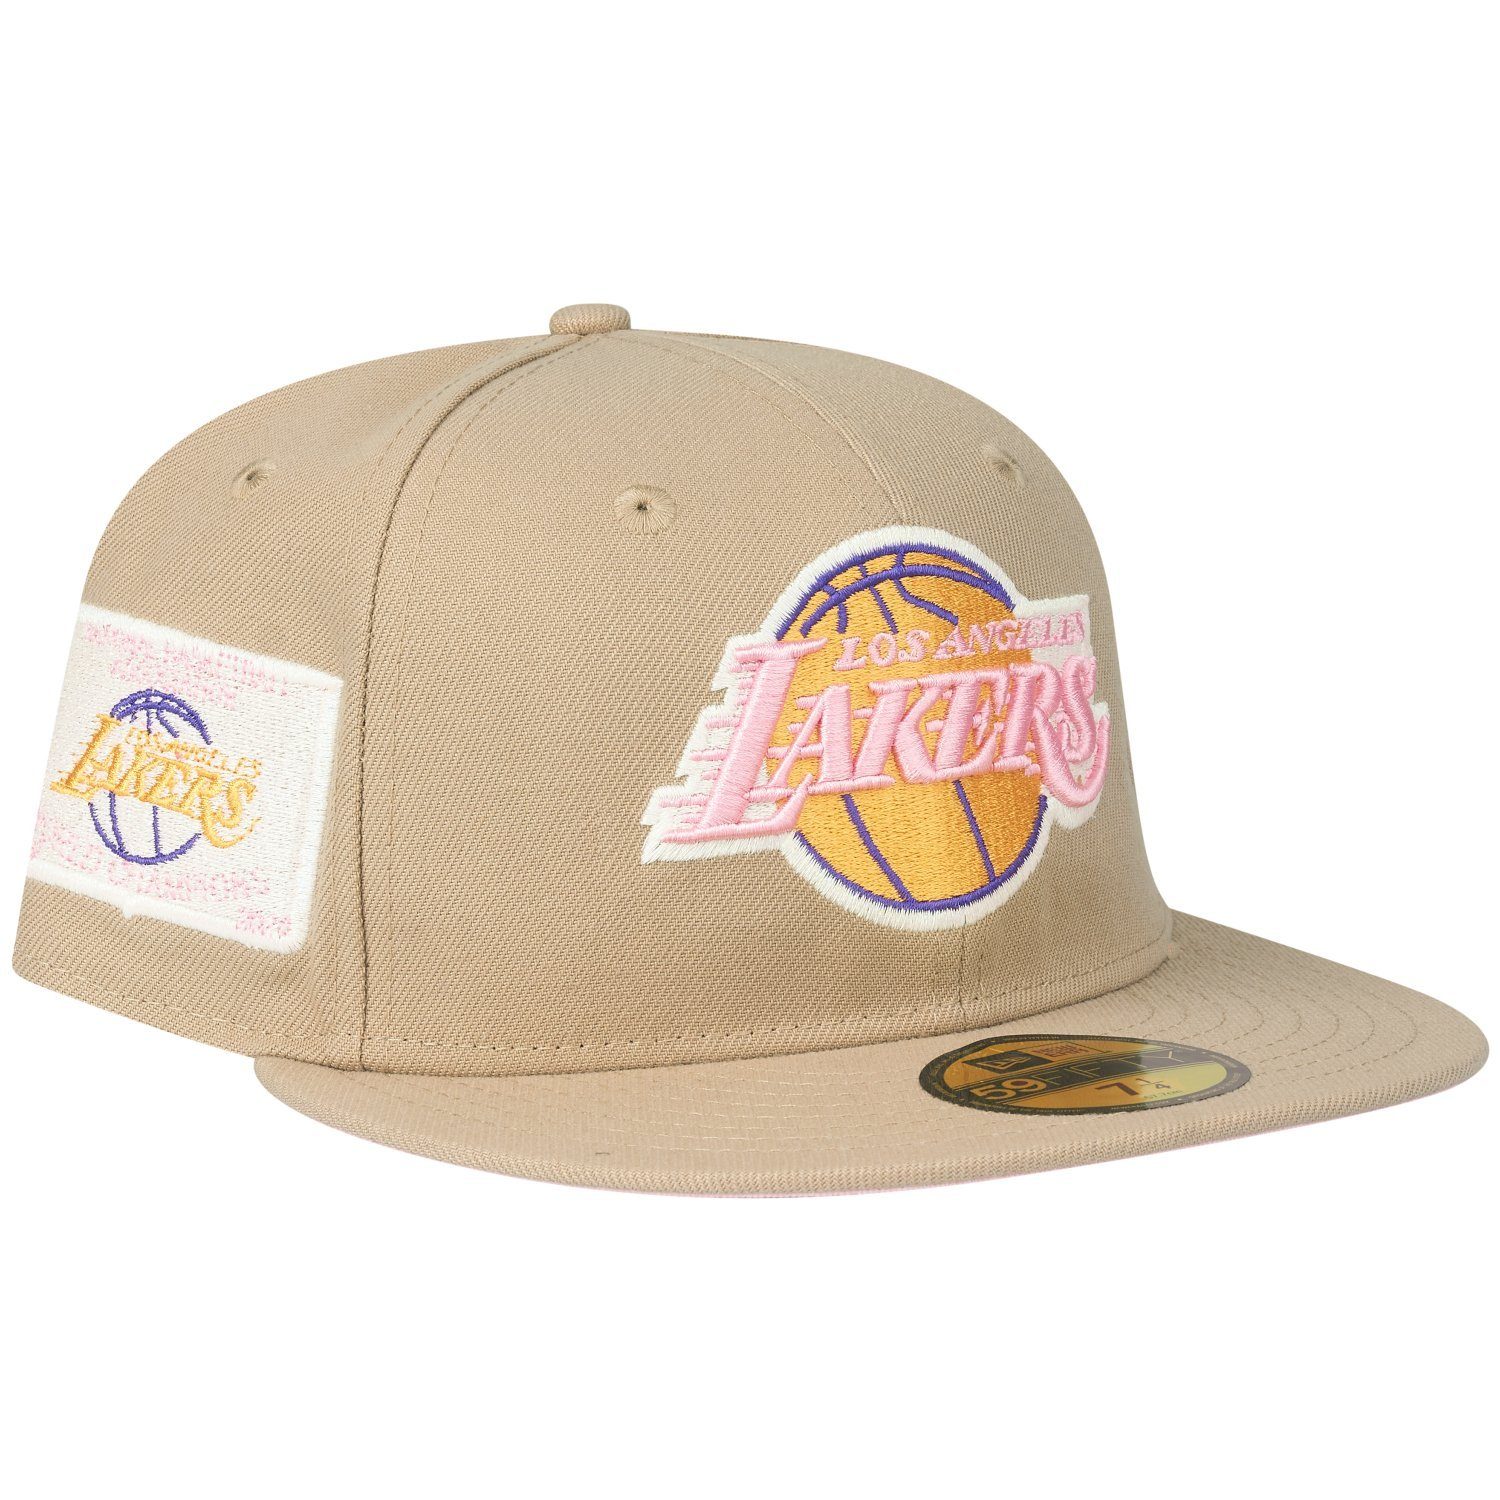 Fitted 59Fifty Cap New Lakers Era Los Angeles